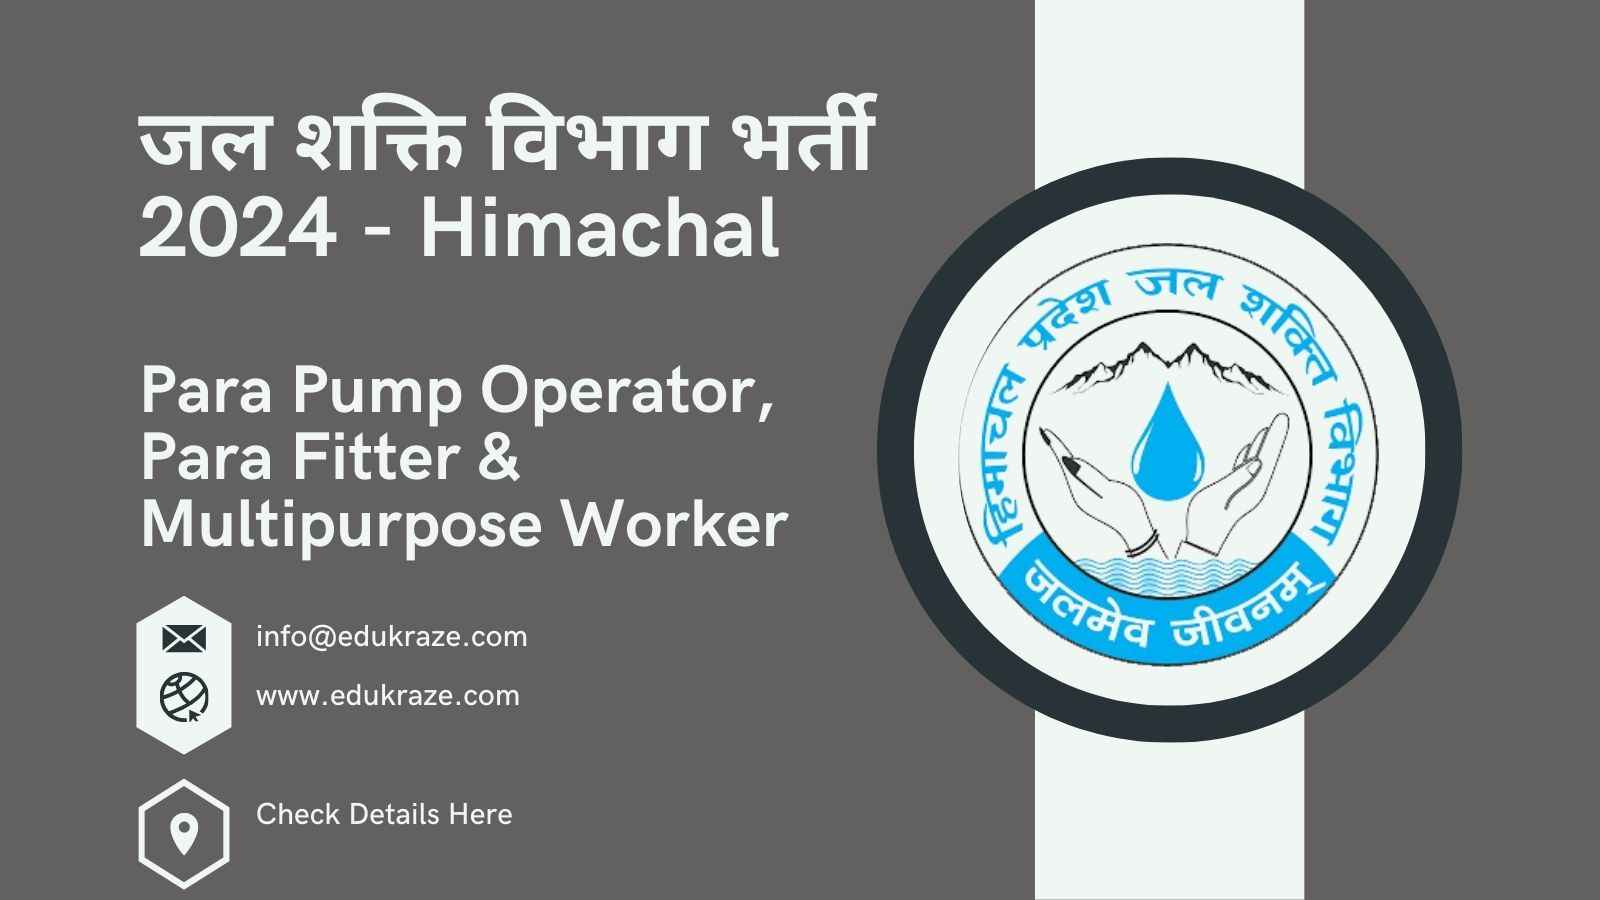 HP Jal Shakti Vibhag Division Anni Recruitment 2024 Out for Para Pump Operator, Para Fitter & Multipurpose Worker